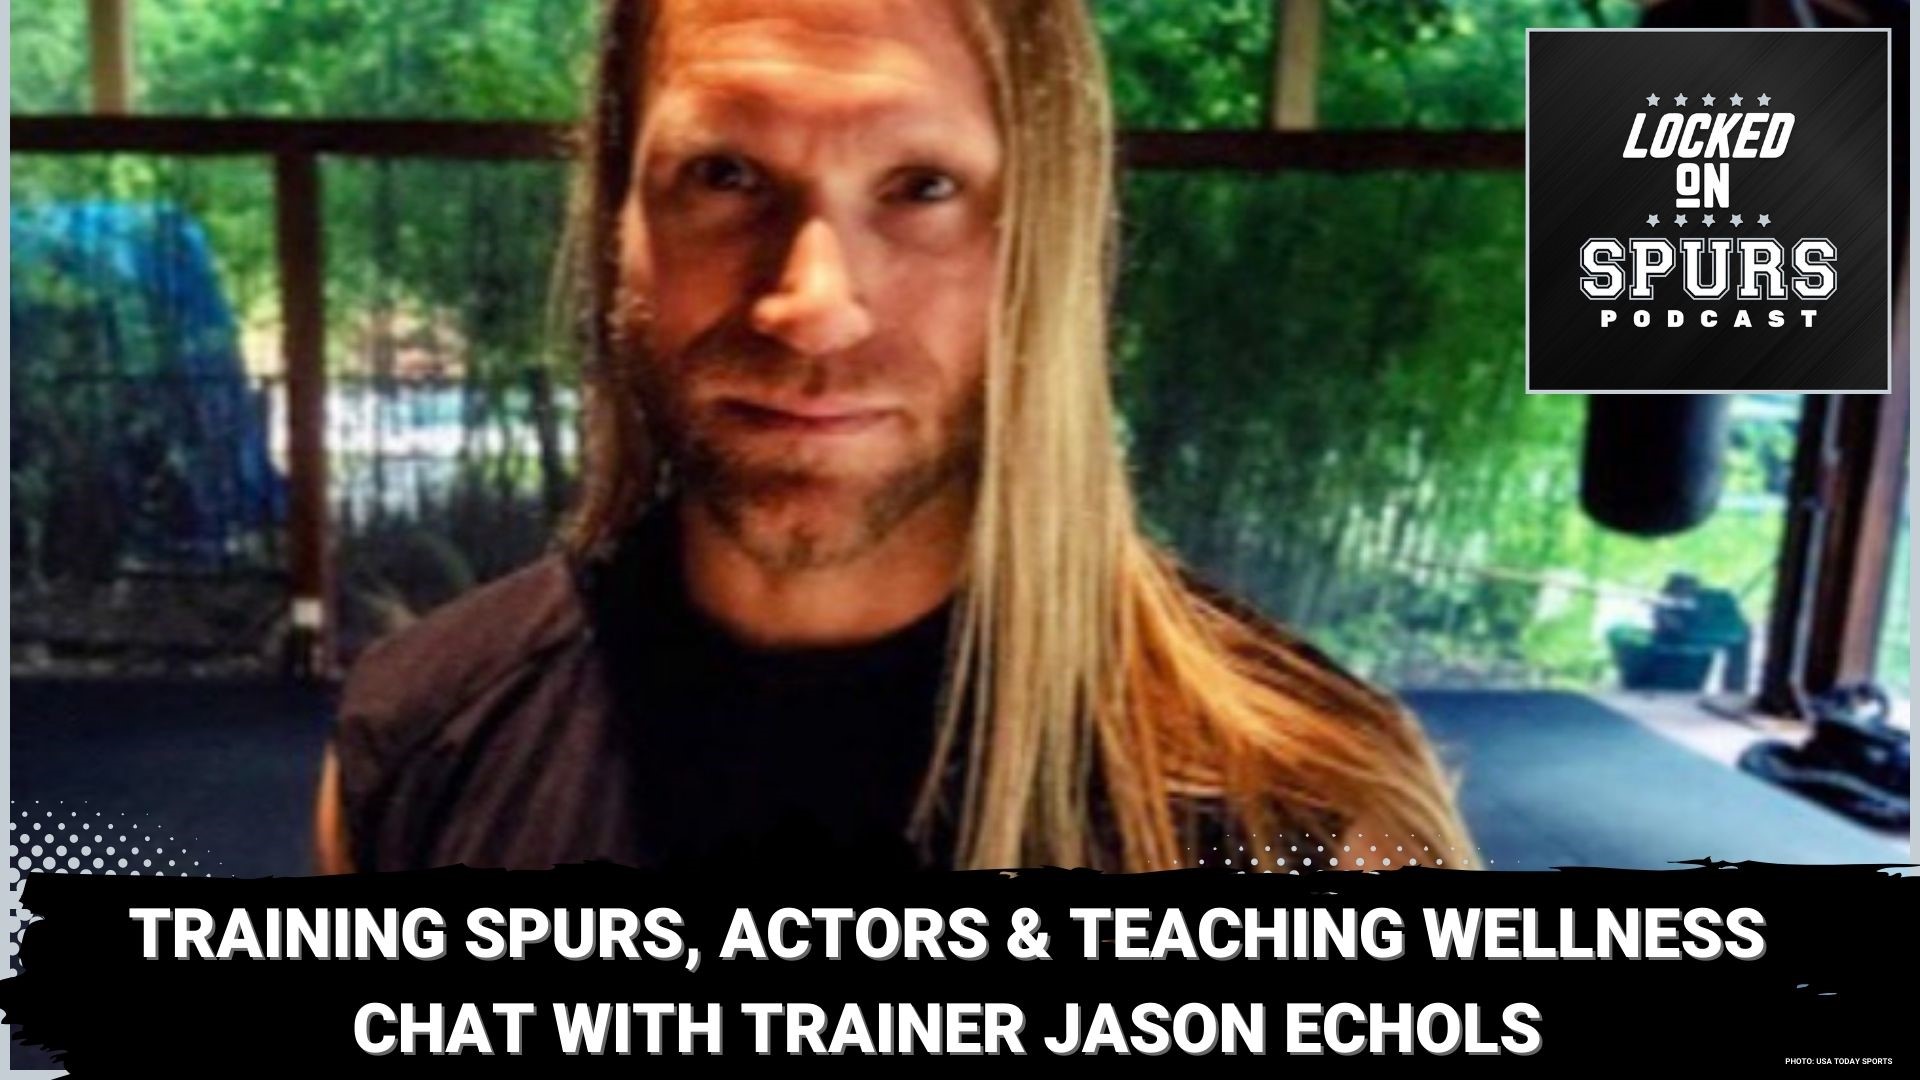 Echols has been training members of the Spurs for years.